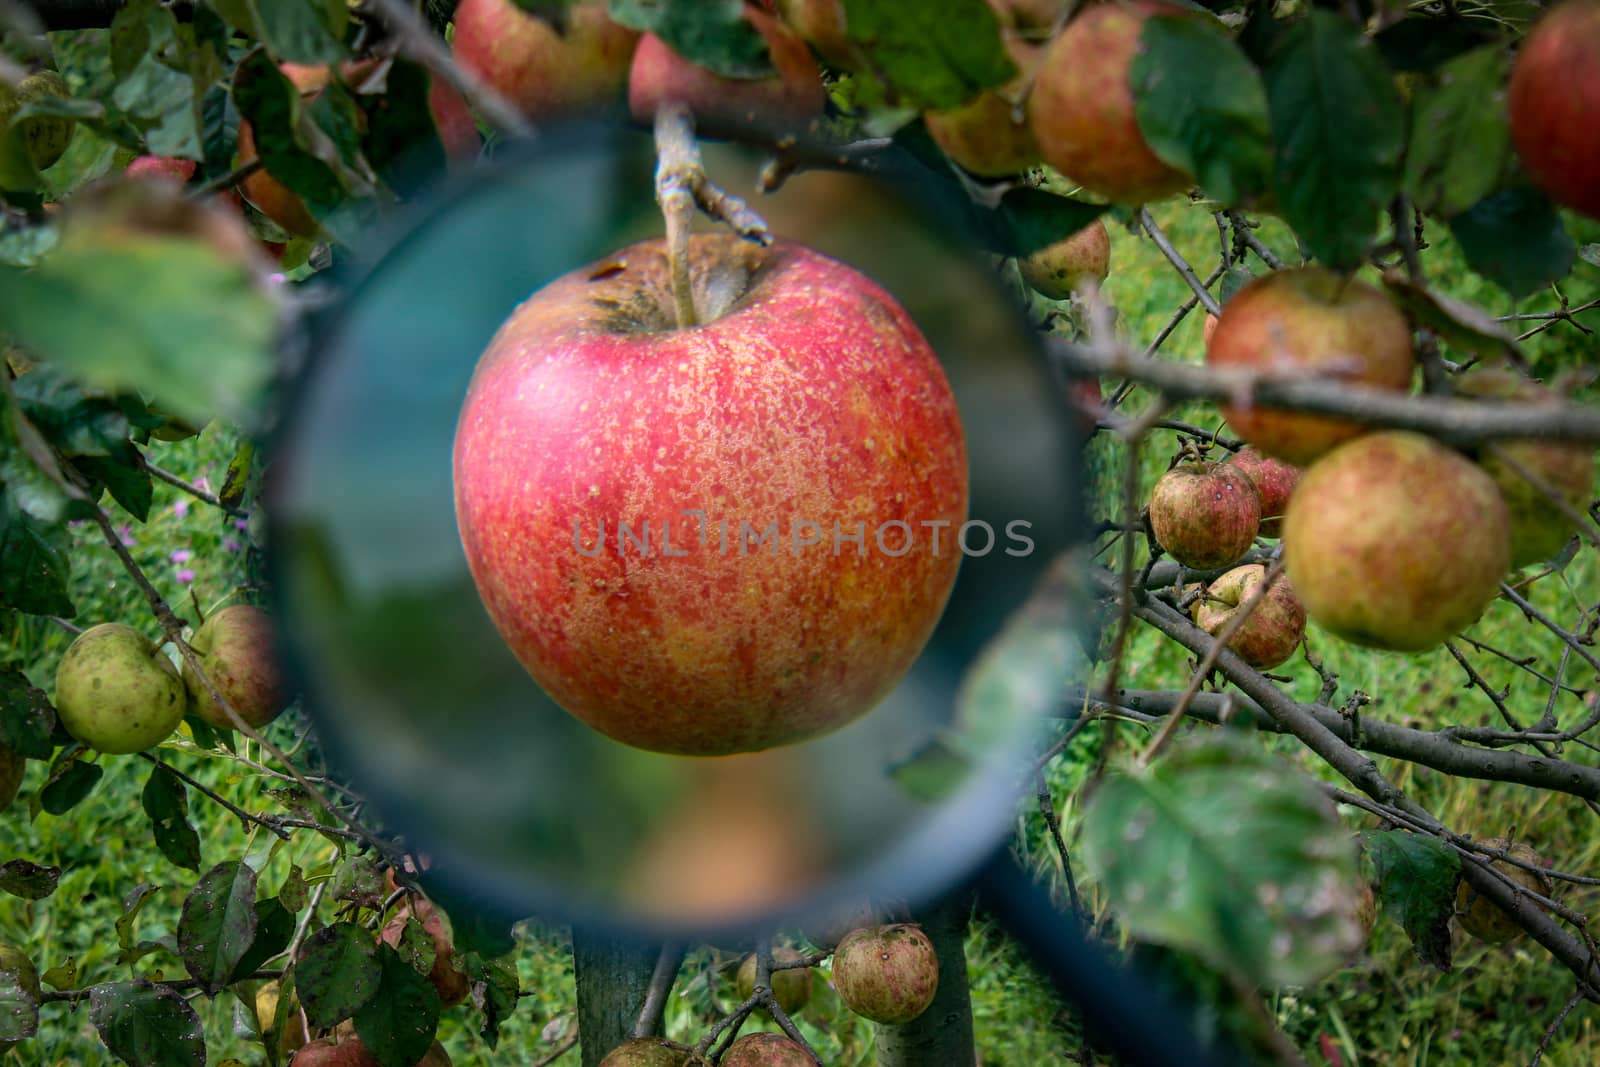 Beautiful red apple on a branch magnified with a magnifying glass. In the background on the branches are other apples. Zavidovici, Bosnia and Herzegovina.